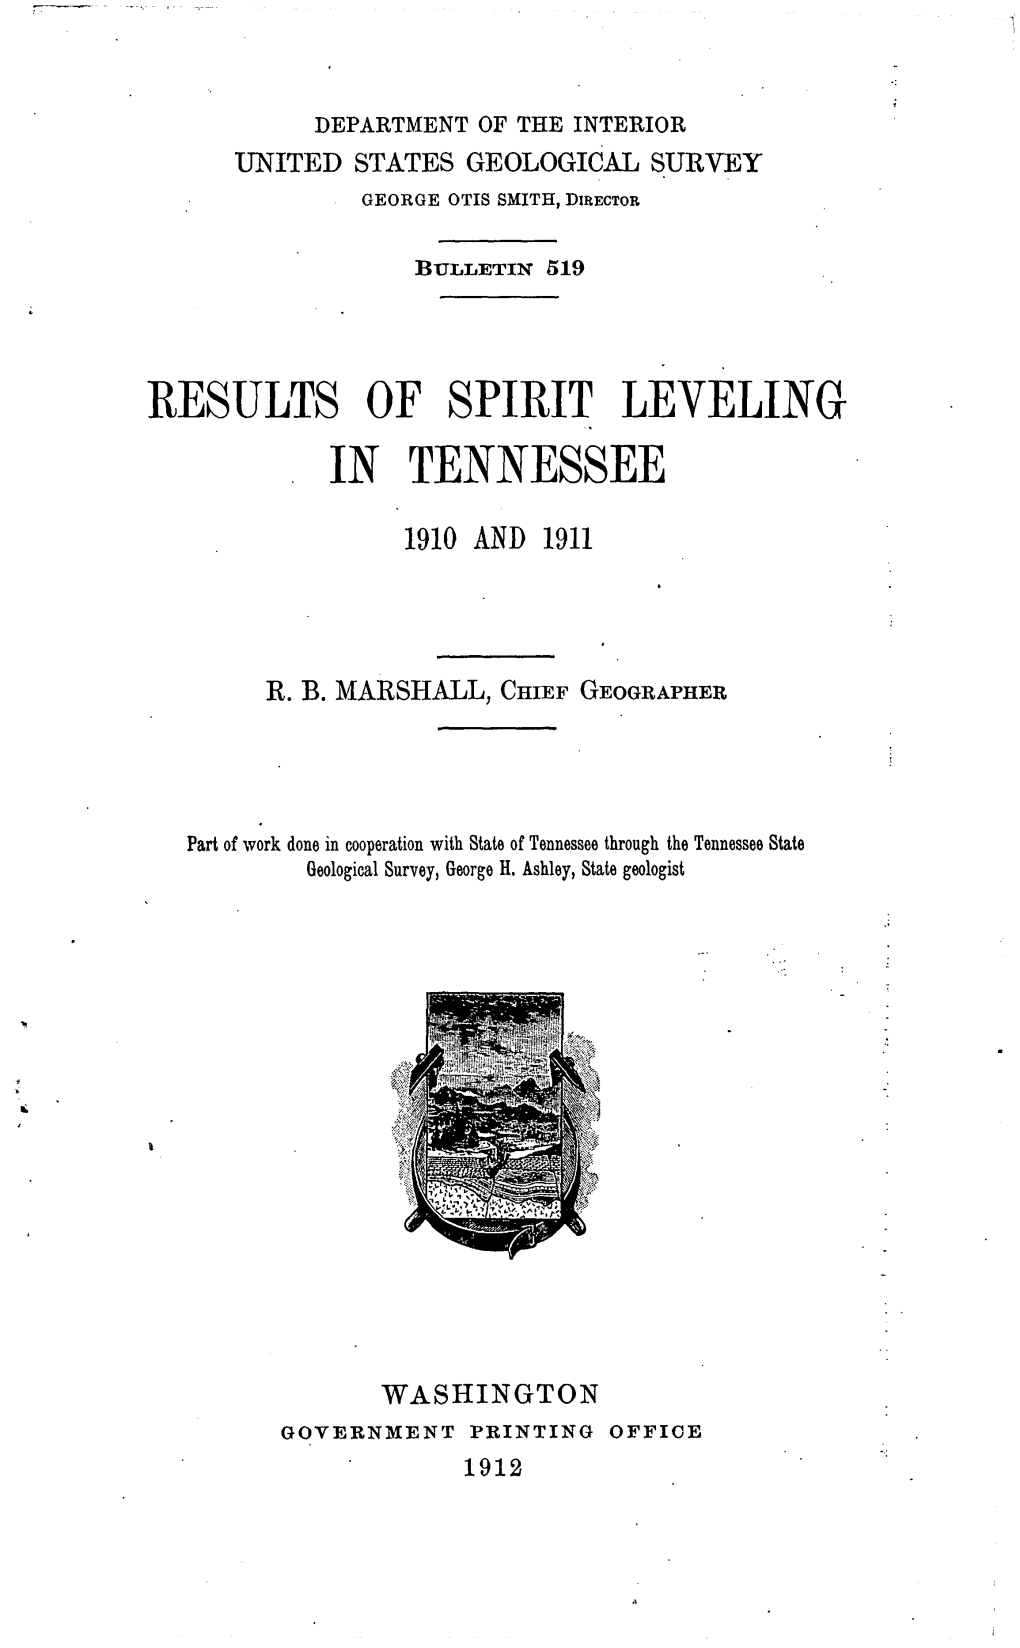 Results of Spirit Leveling . in Tennessee 1910 and 1911